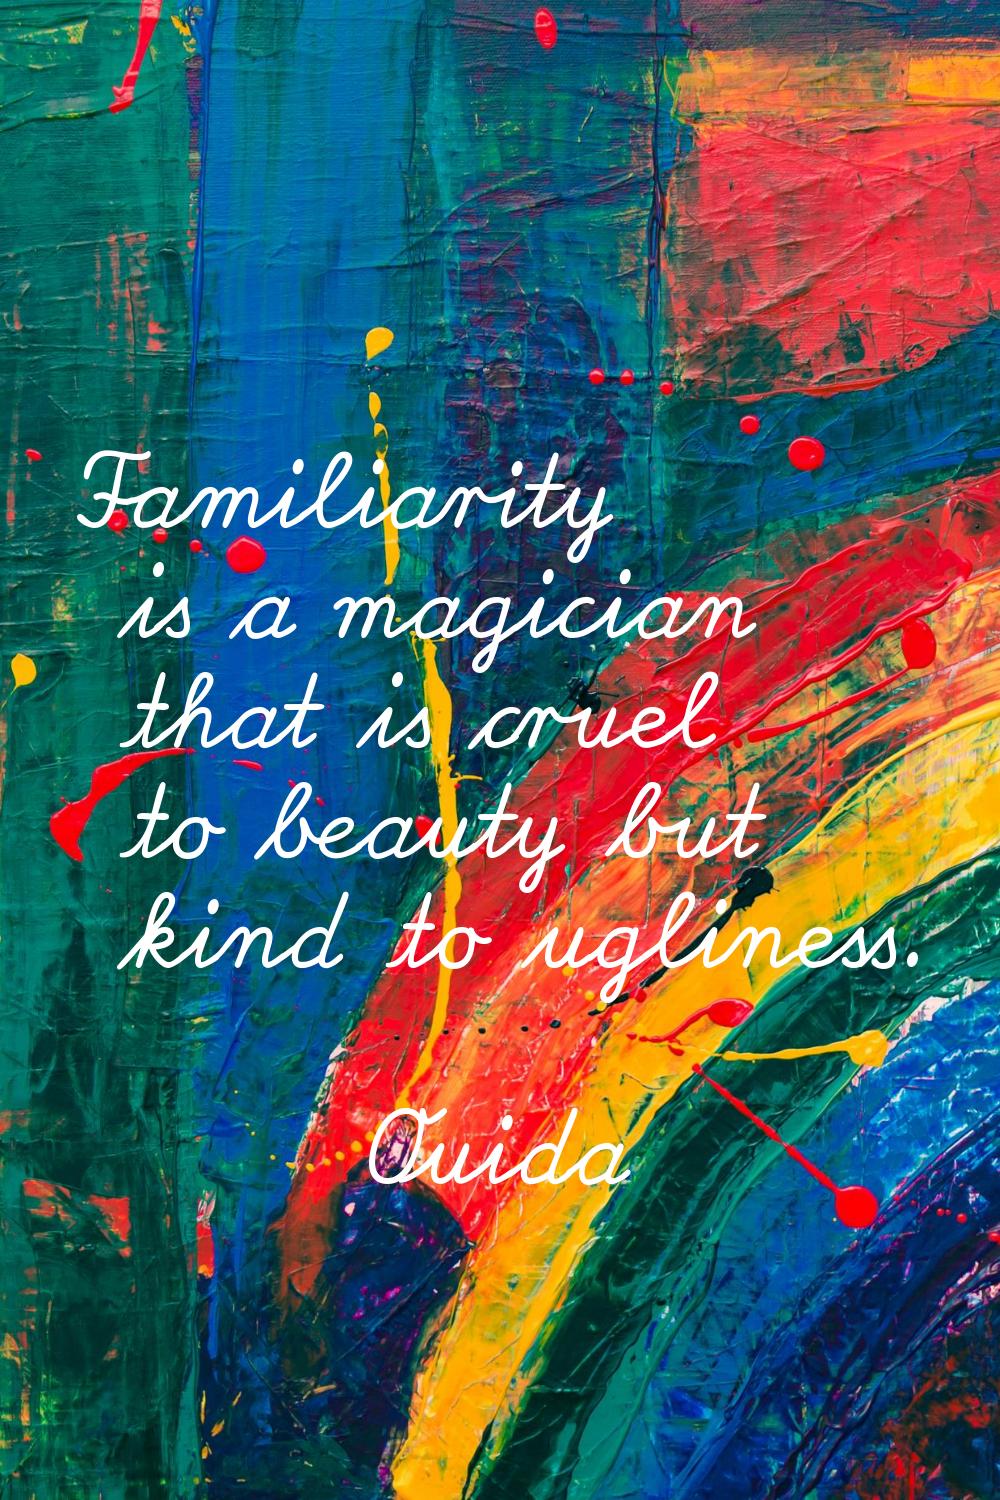 Familiarity is a magician that is cruel to beauty but kind to ugliness.